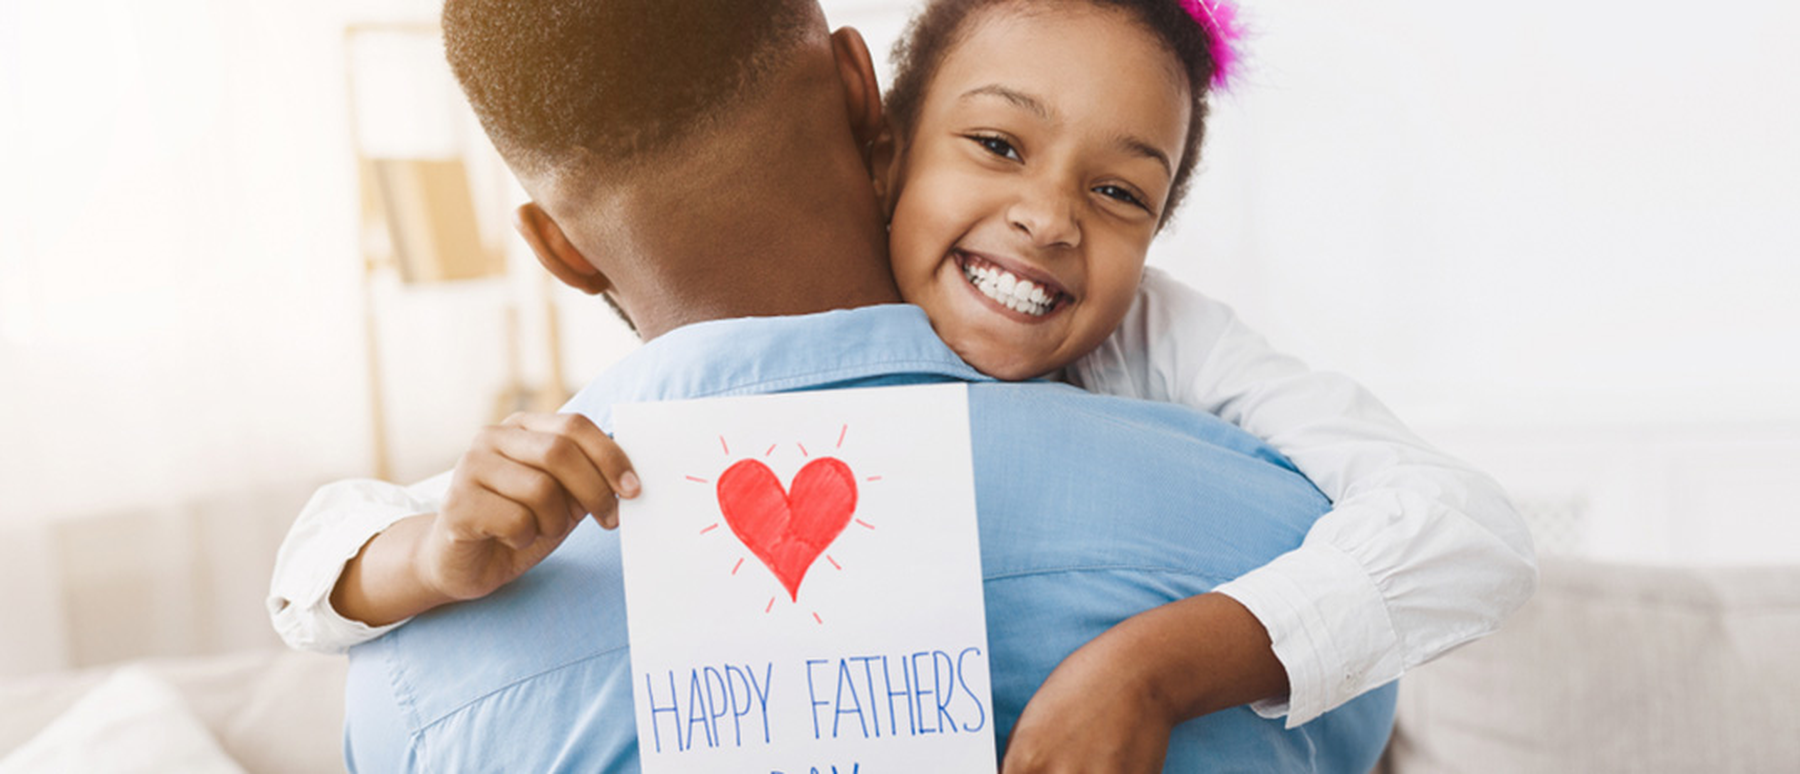 Young smiling girl hugging dad holding a happy Father's Day card